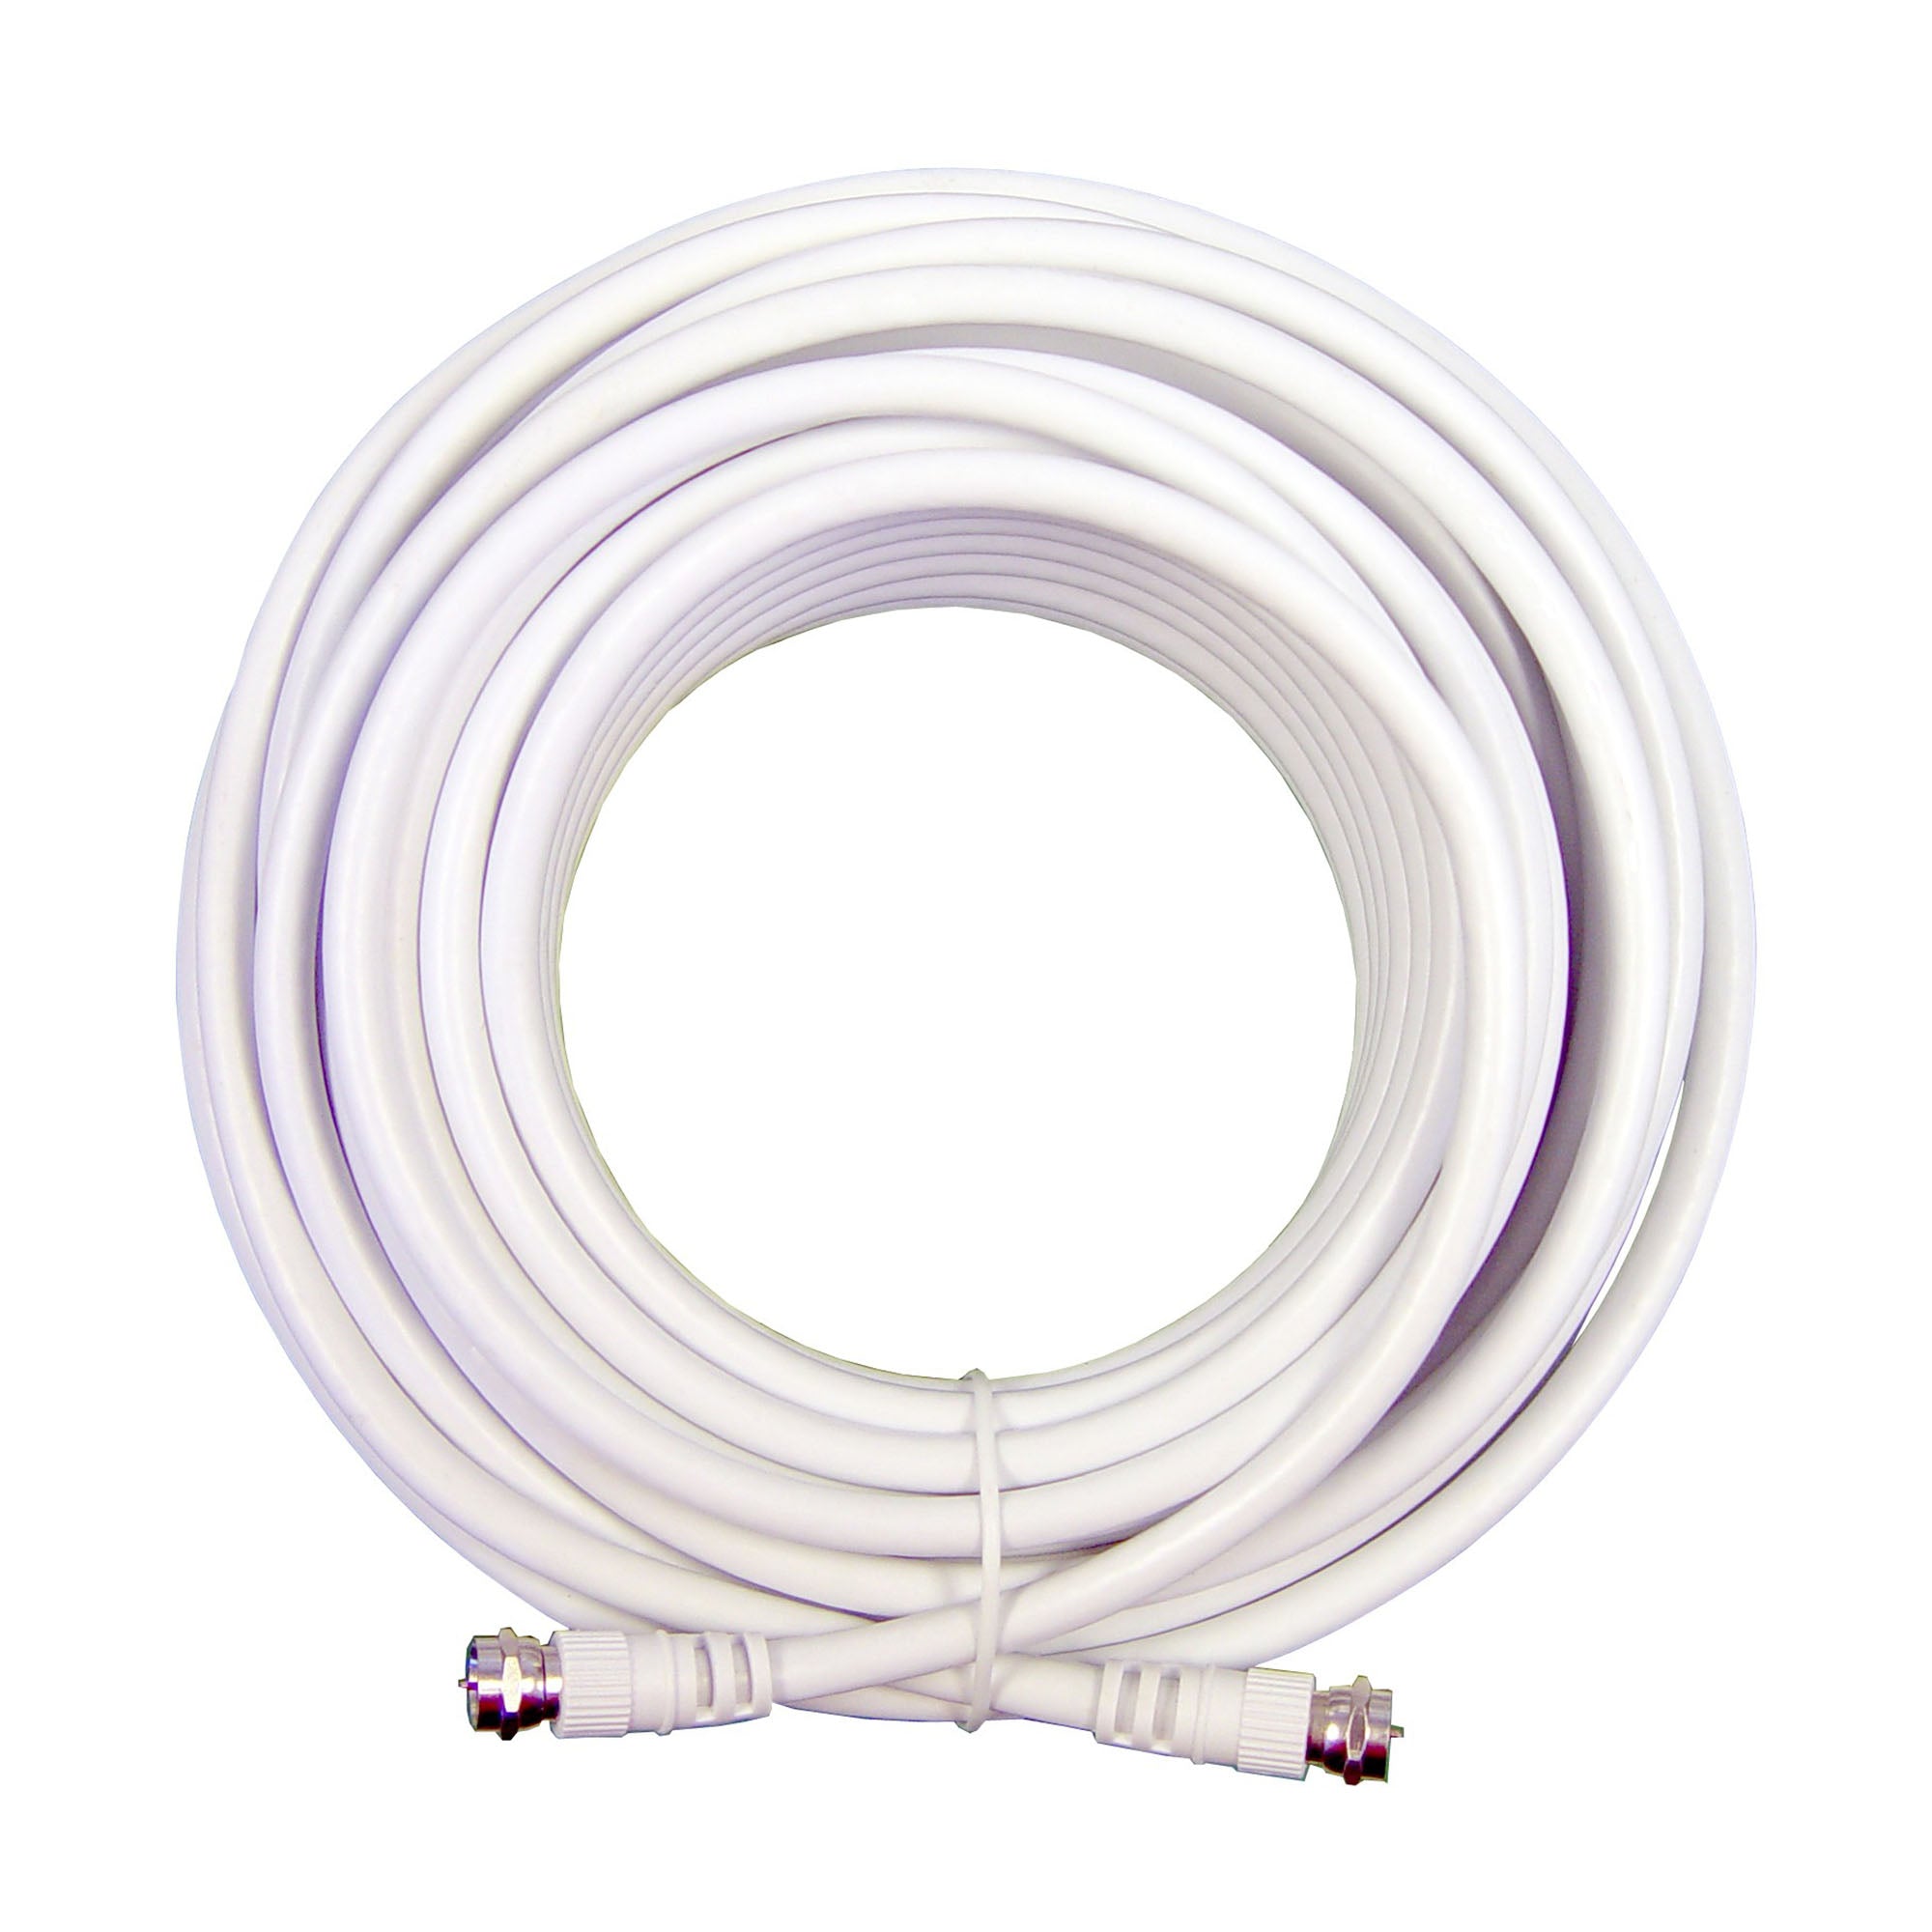 Wilson Cable 20 ft. white RG6 low loss coax cable - 670WI950620